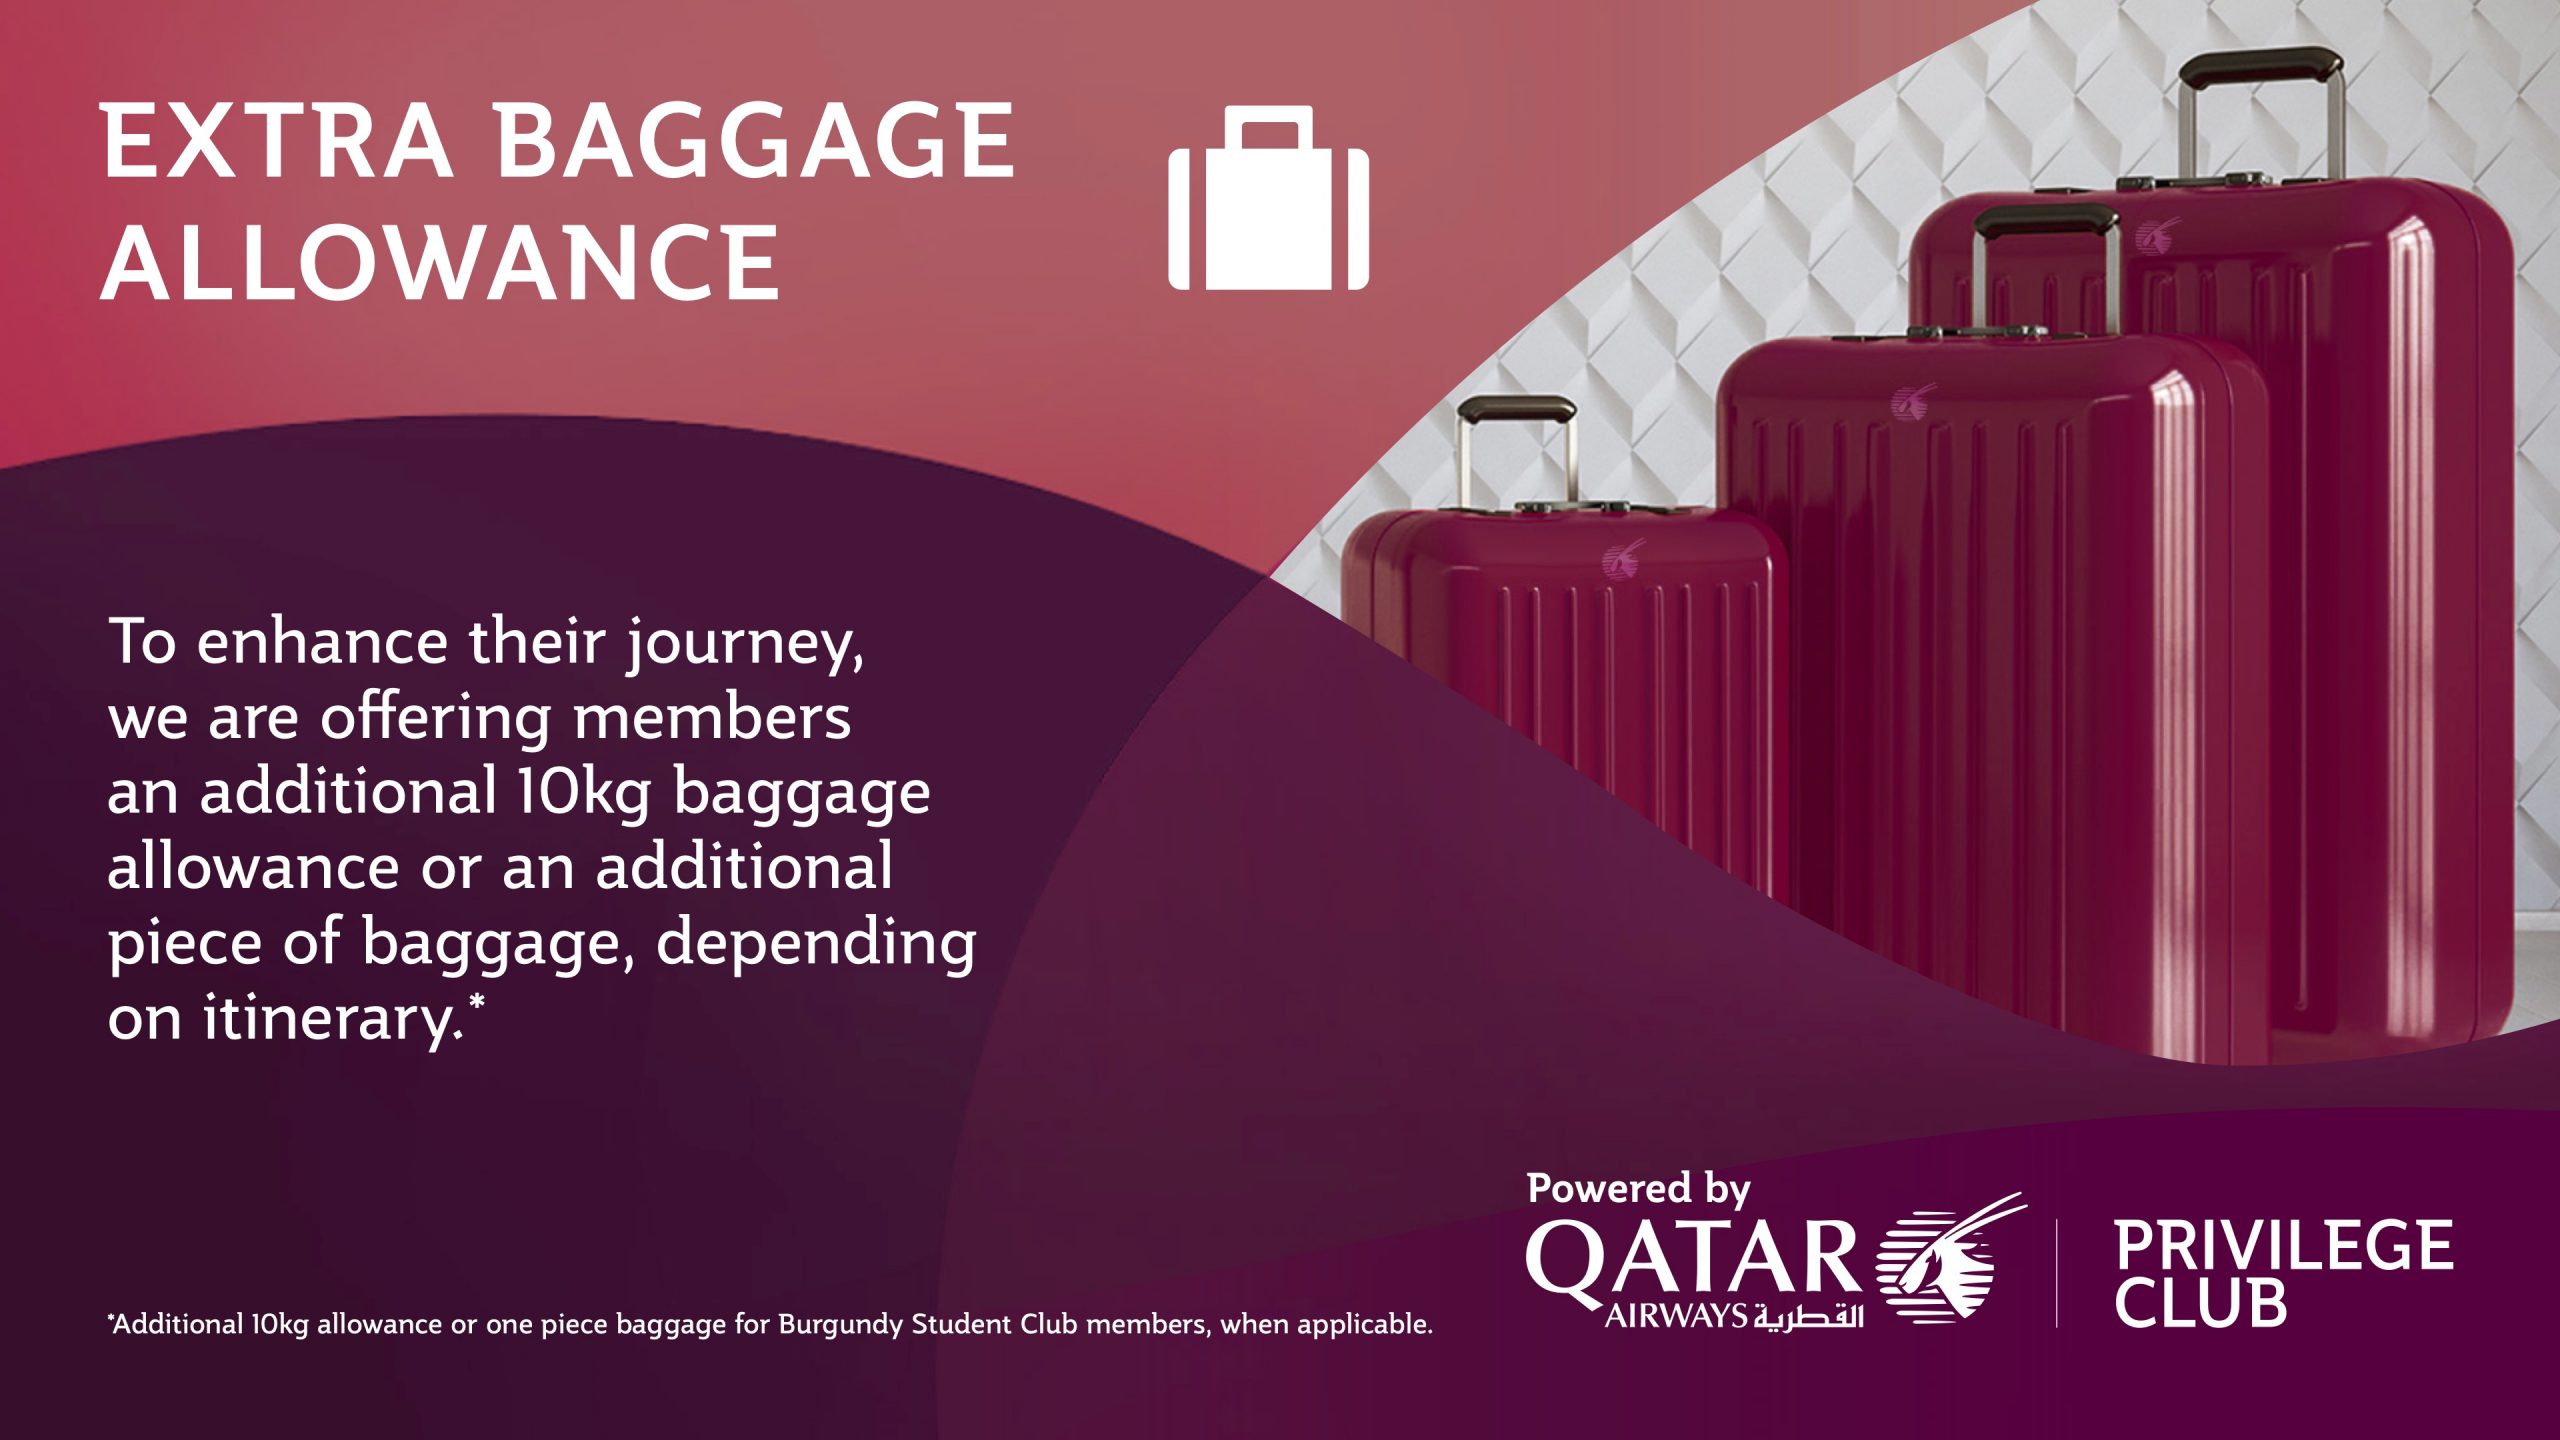 Extra Baggage Allowance